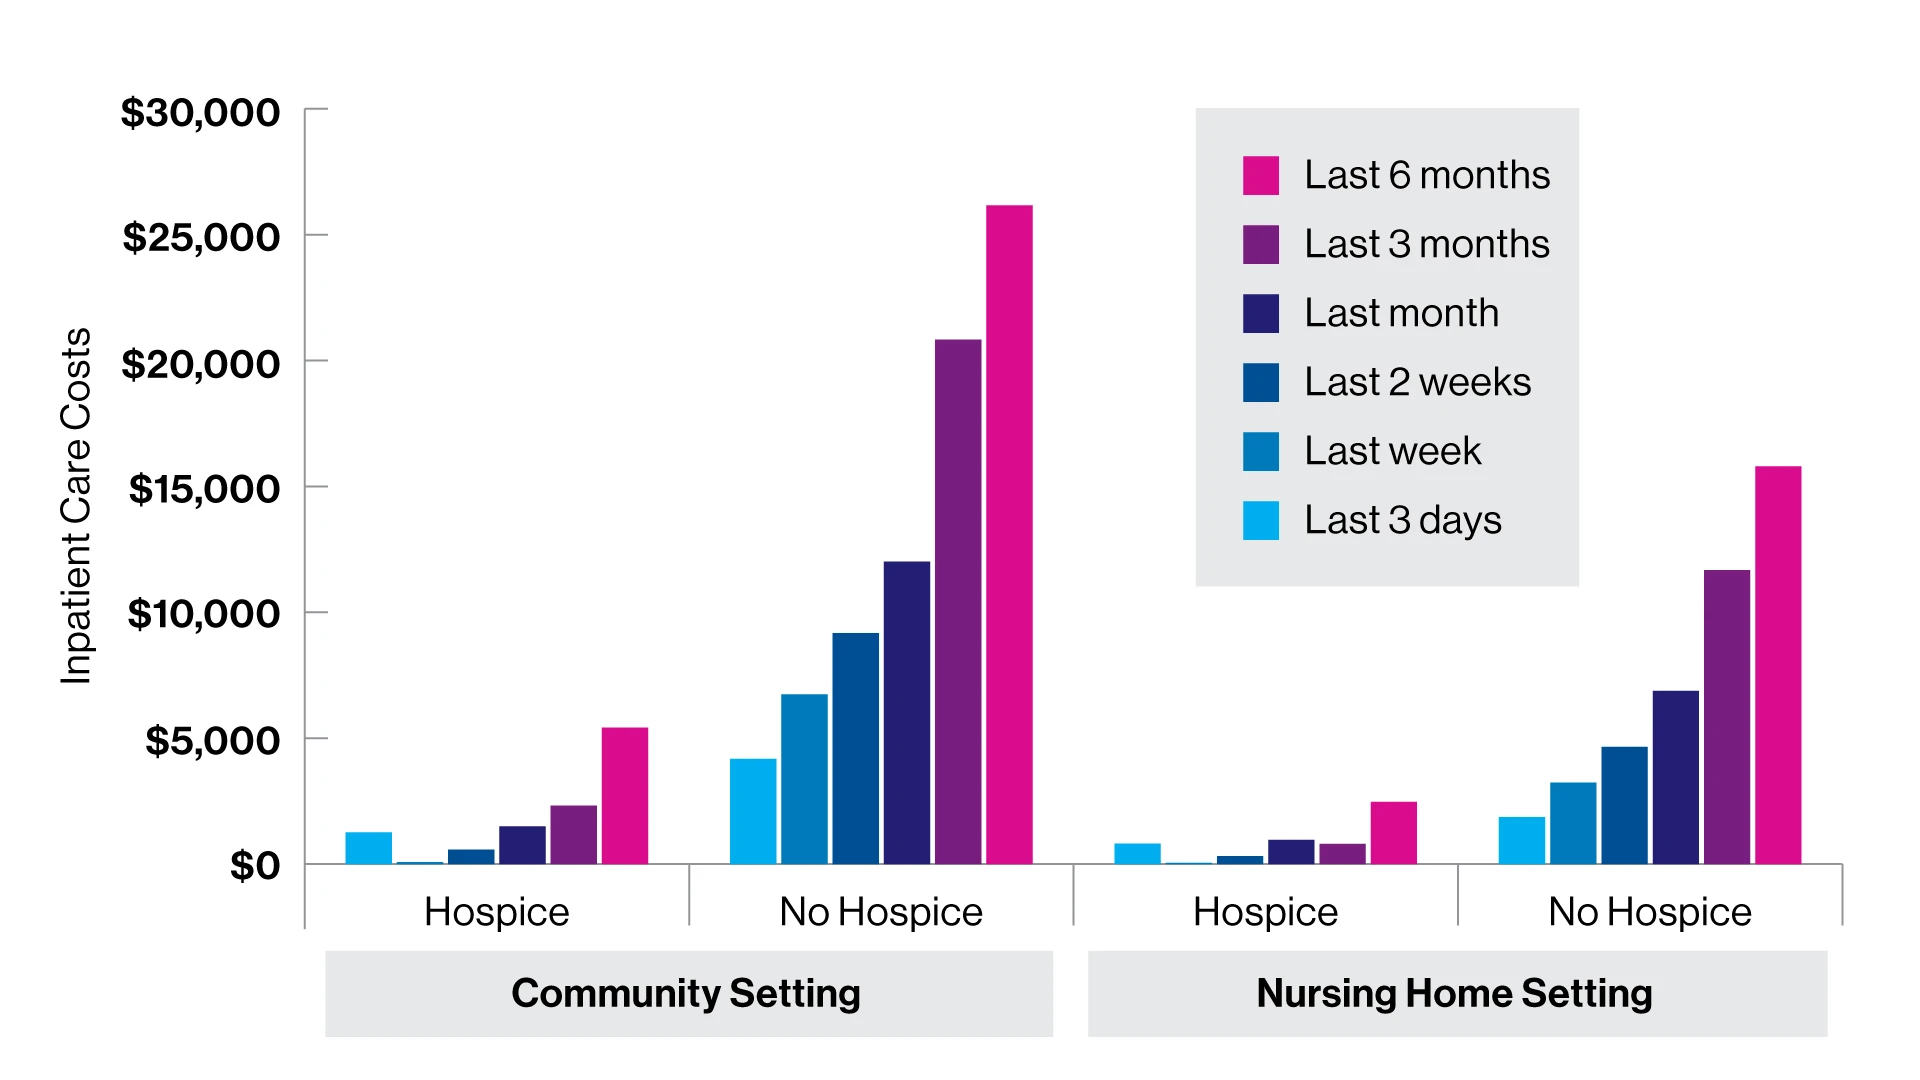 Spending for inpatient care for people with dementia in community and nursing home settings in the United States, by hospice use, 2002–19.